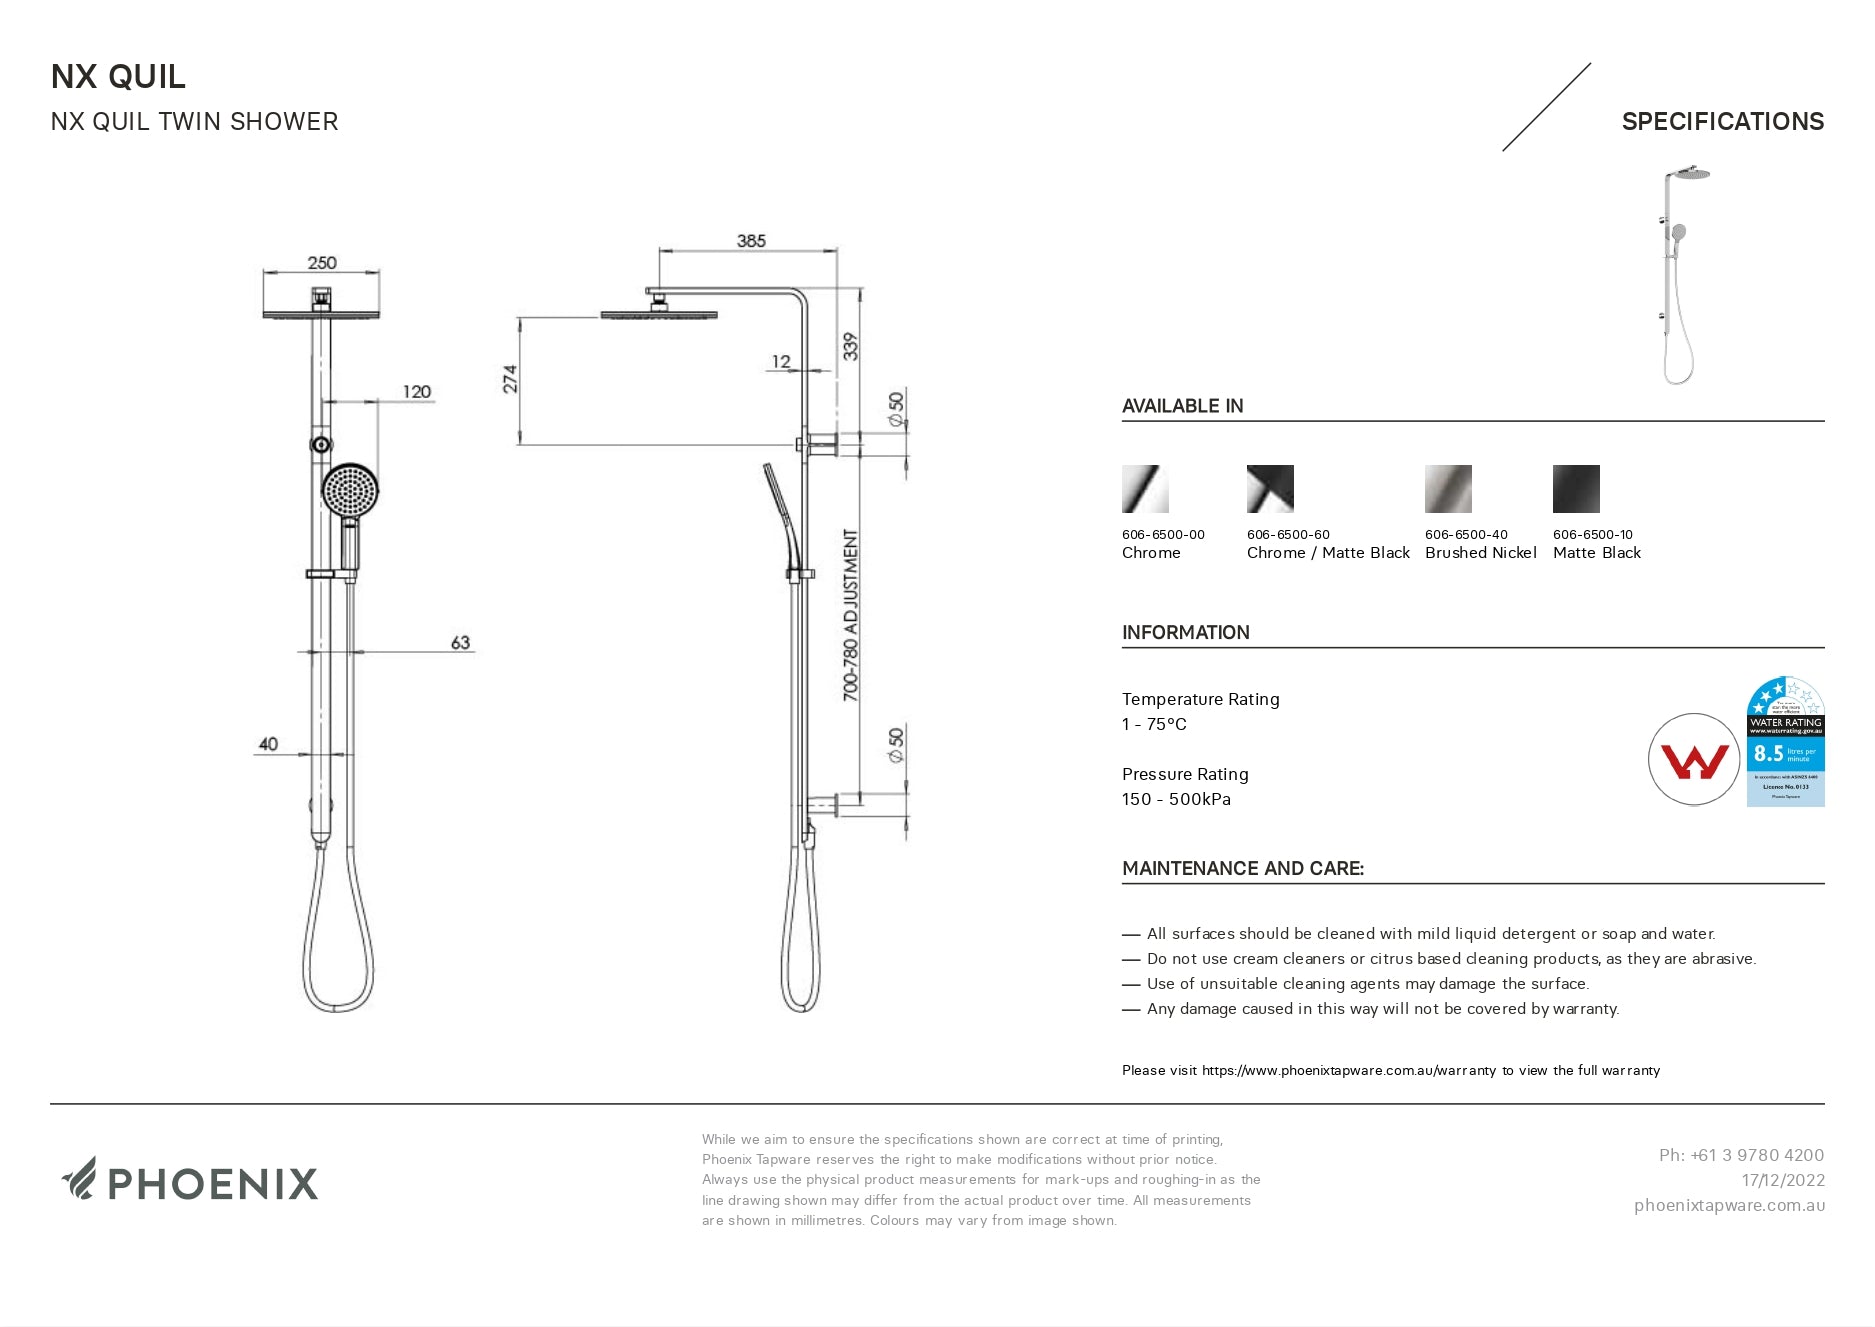 PHOENIX NX QUIL TWIN SHOWER BRUSHED NICKEL